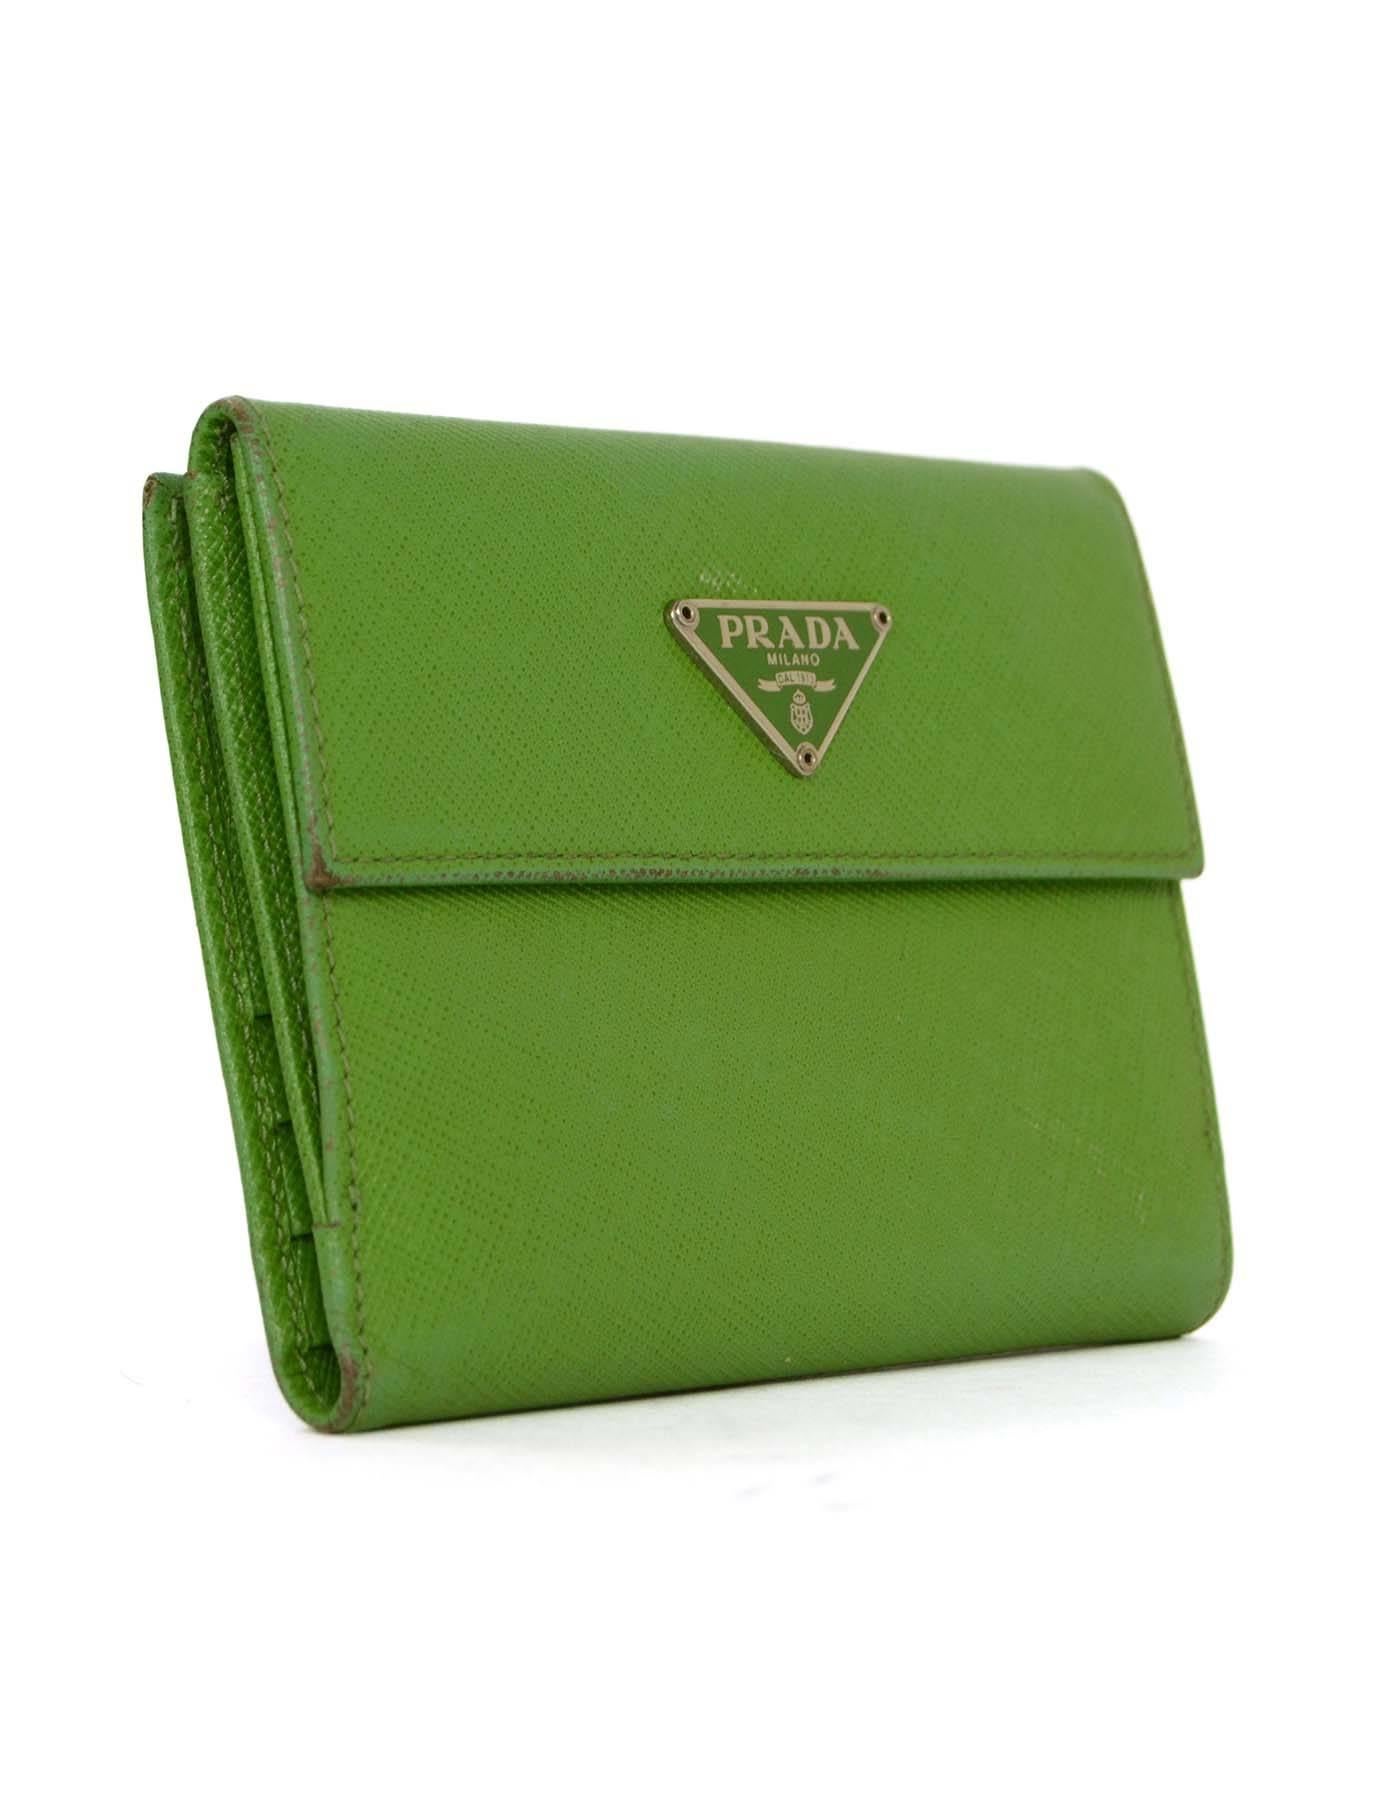 Prada Apple Green Saffiano Short Wallet 
Features green and silvertone Prada plate on front flap top
Made In: Italy
Color: Apple green
Hardware: Silvertone
Materials: Saffiano leather
Lining: Apple green saffiano leather
Closure/Opening: One